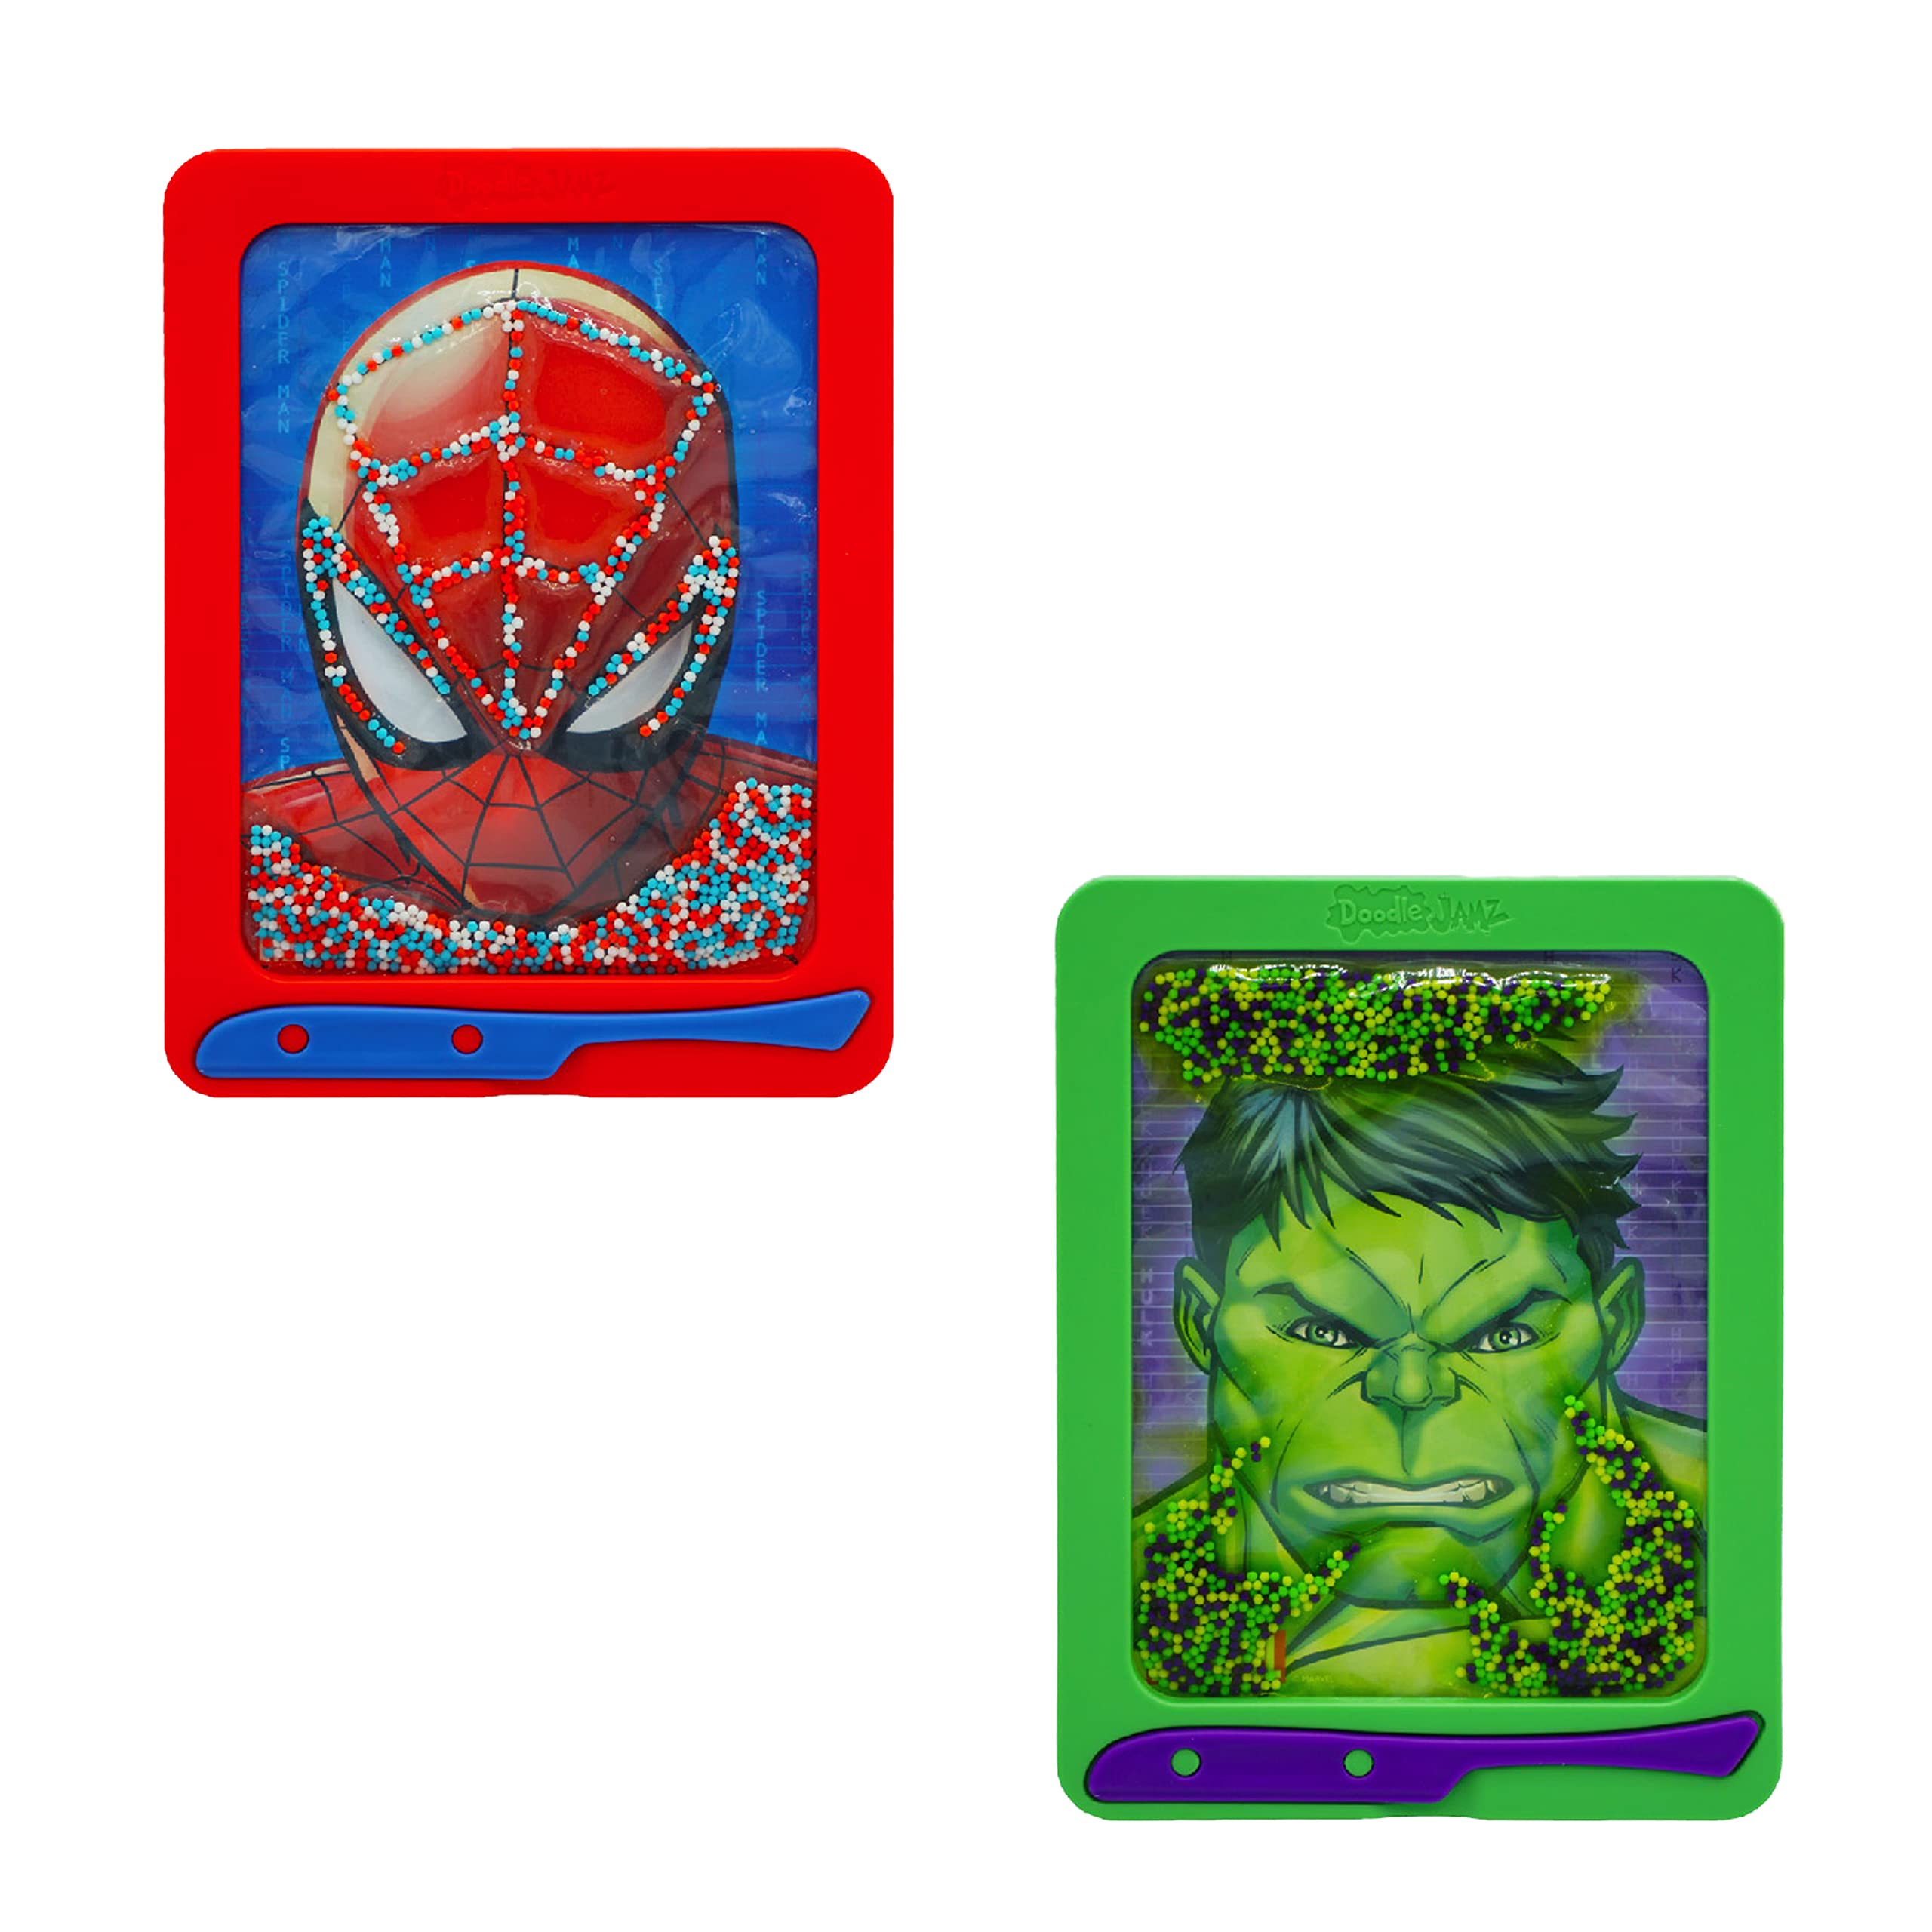 DoodleJamz Marvel JellyPics - Sensory Drawing Pads Filled with Non-Toxic Squishy Beads and Gel – Includes Stylus, Removable 2-Sided Emoji Backer Card (Spider-Man + Hulk Bundle)